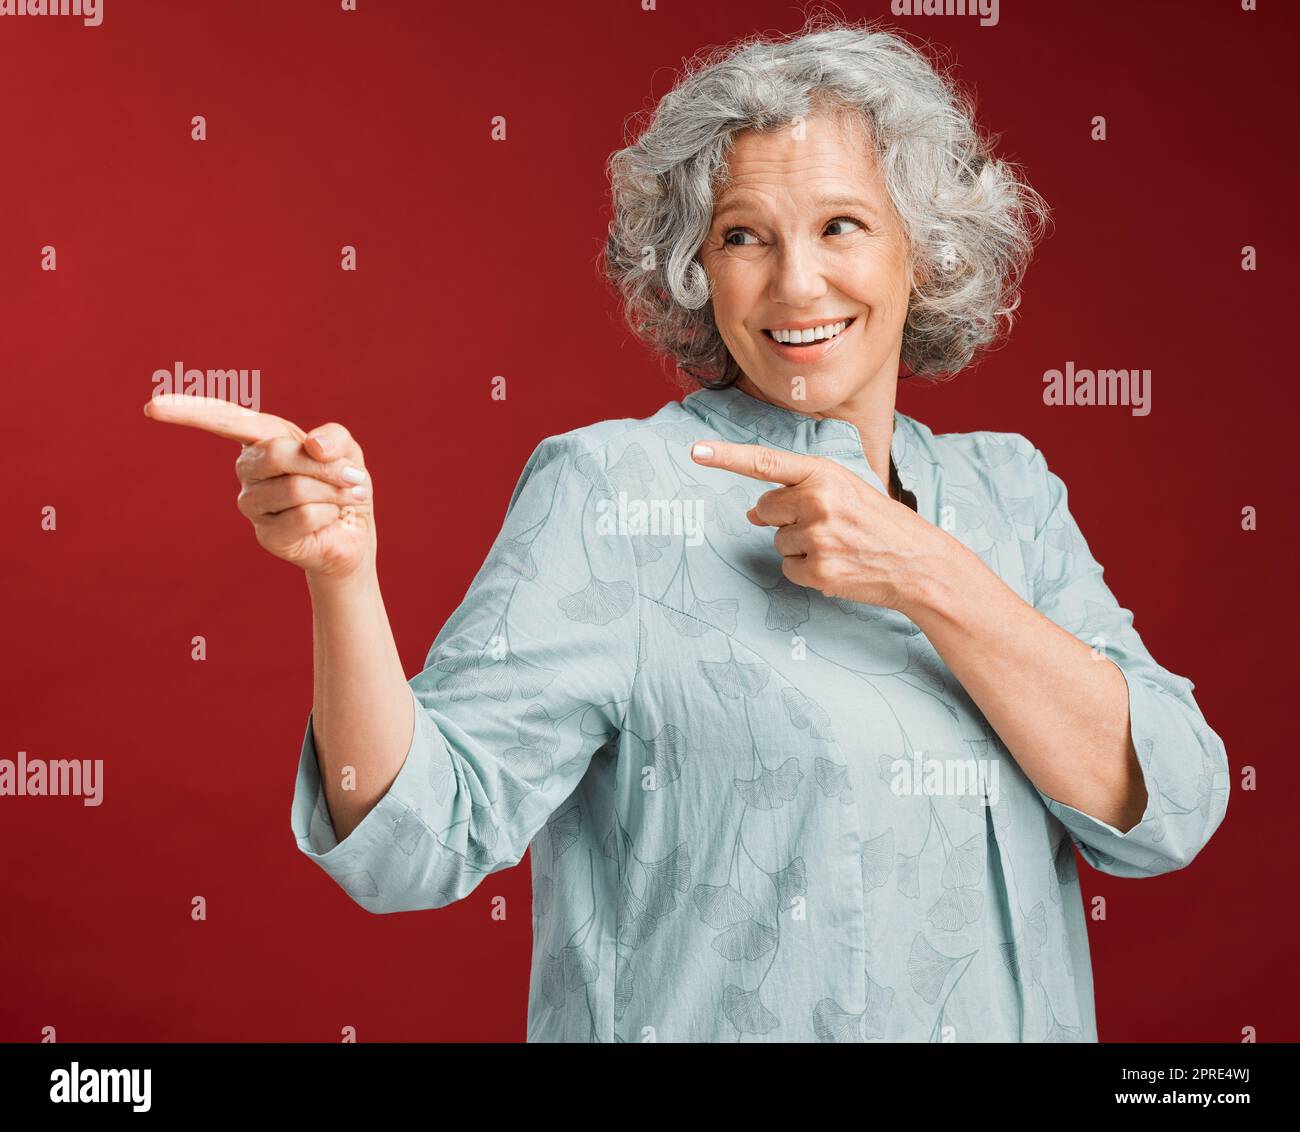 Portrait of mature woman, smiling and pointing with a gesture of affirmation, with a red background. Beautiful, confident and happy senior lady standing, index fingers pointed in positive motivation. Stock Photo